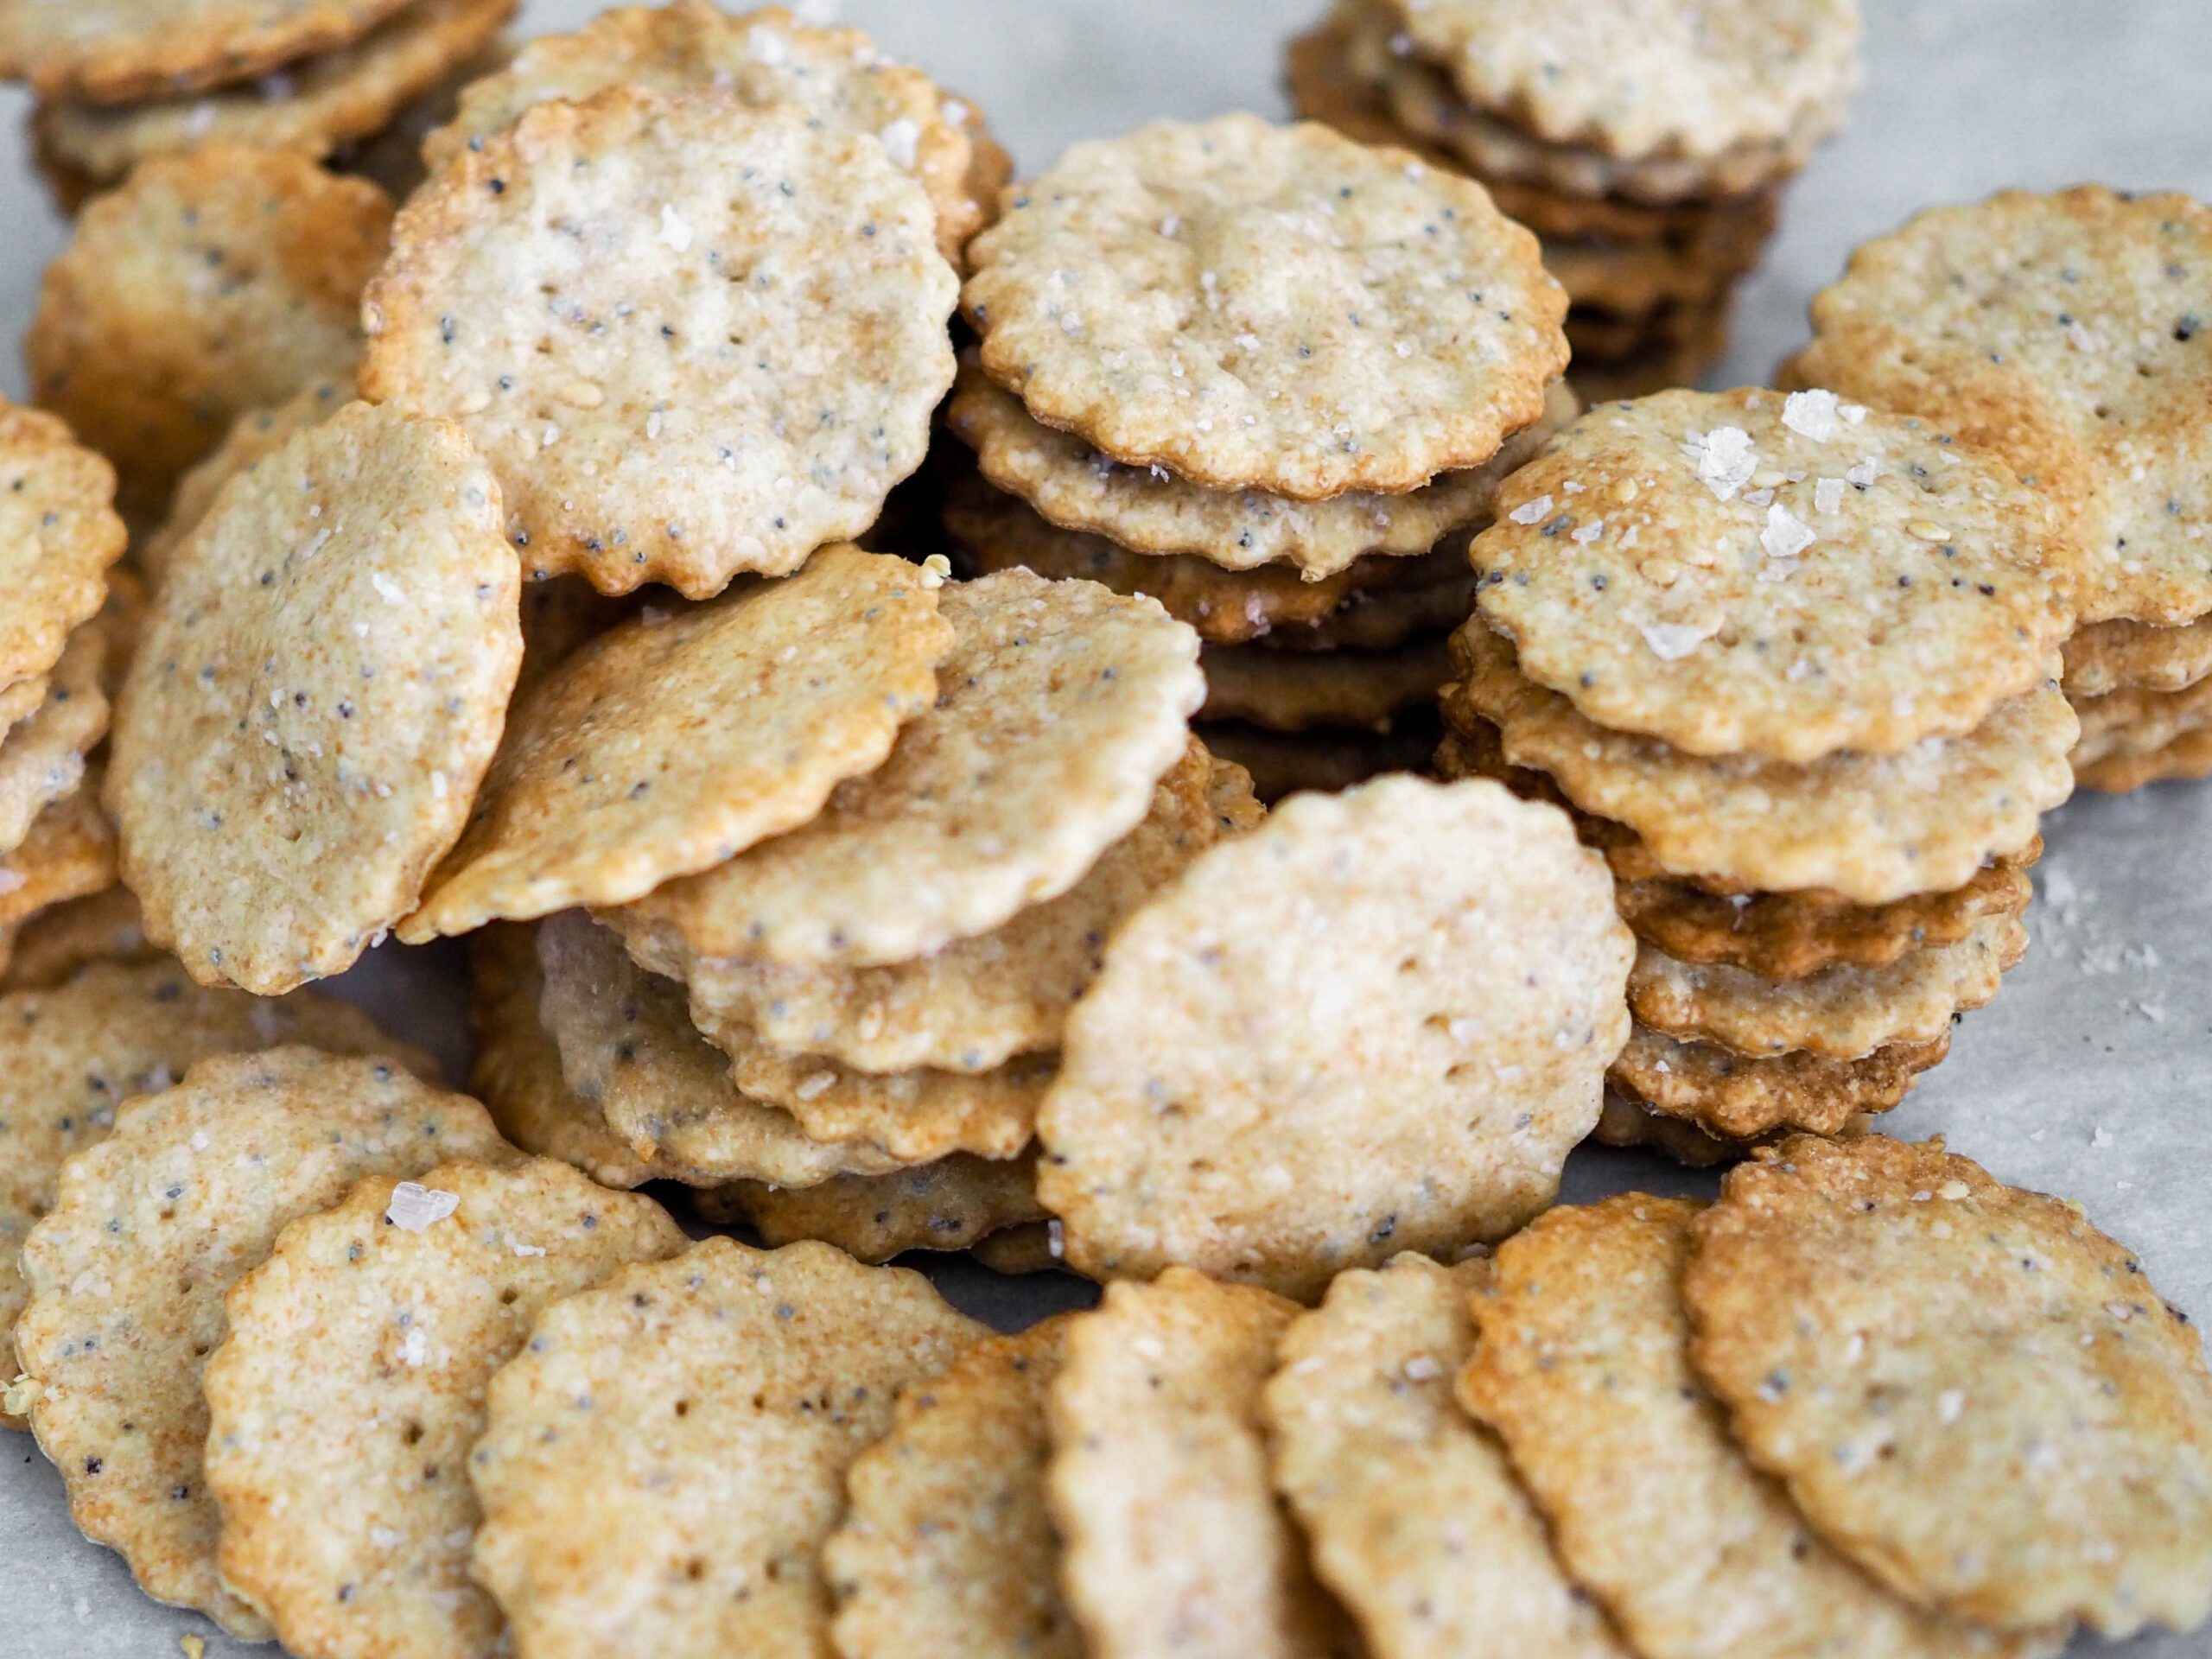 A stack of sesame and poppy seed crackers.